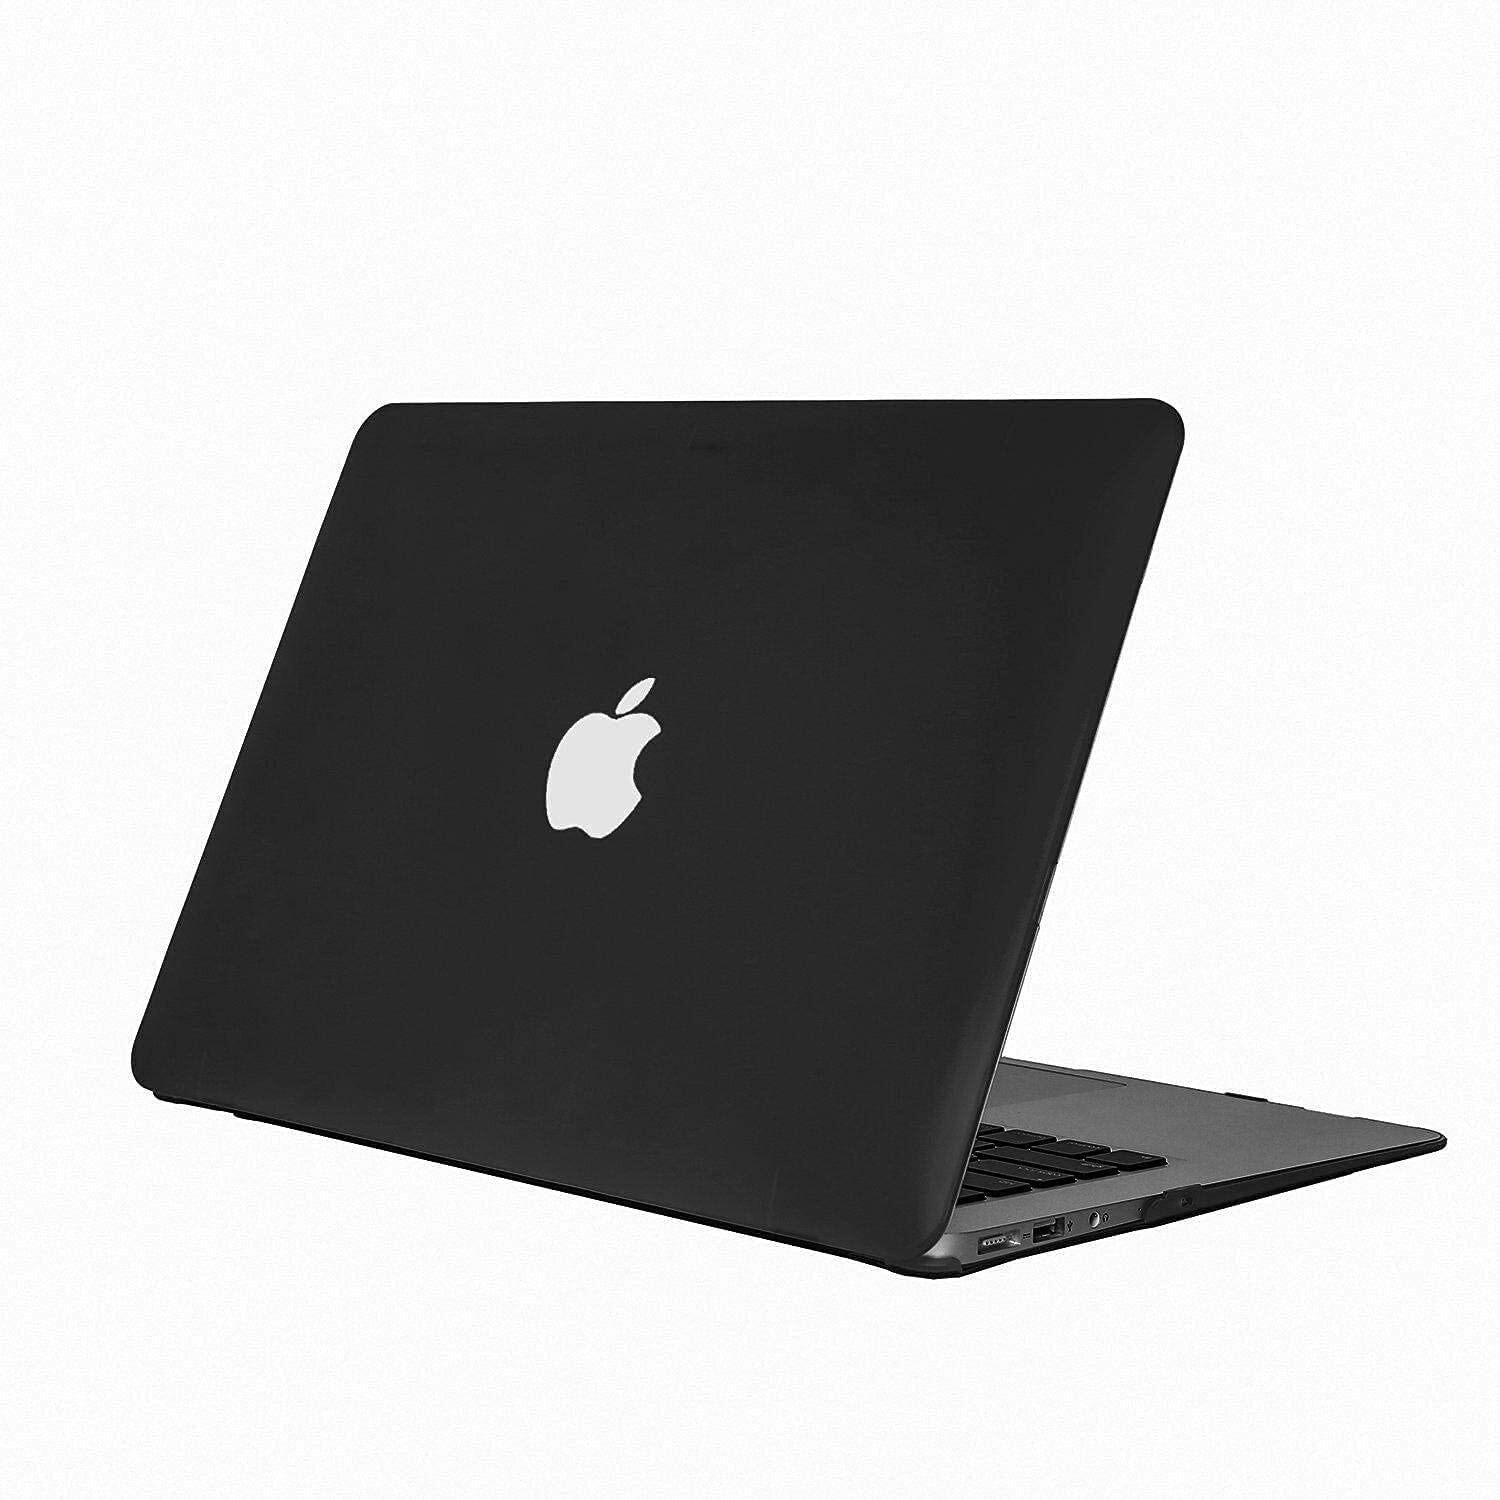 Ntech Covers Macbook Air 13 Case Rubberized Hard Matte Case Cover For Apple Macbook Air 13.3 Inch (Models: A1369 And A1466)-Black